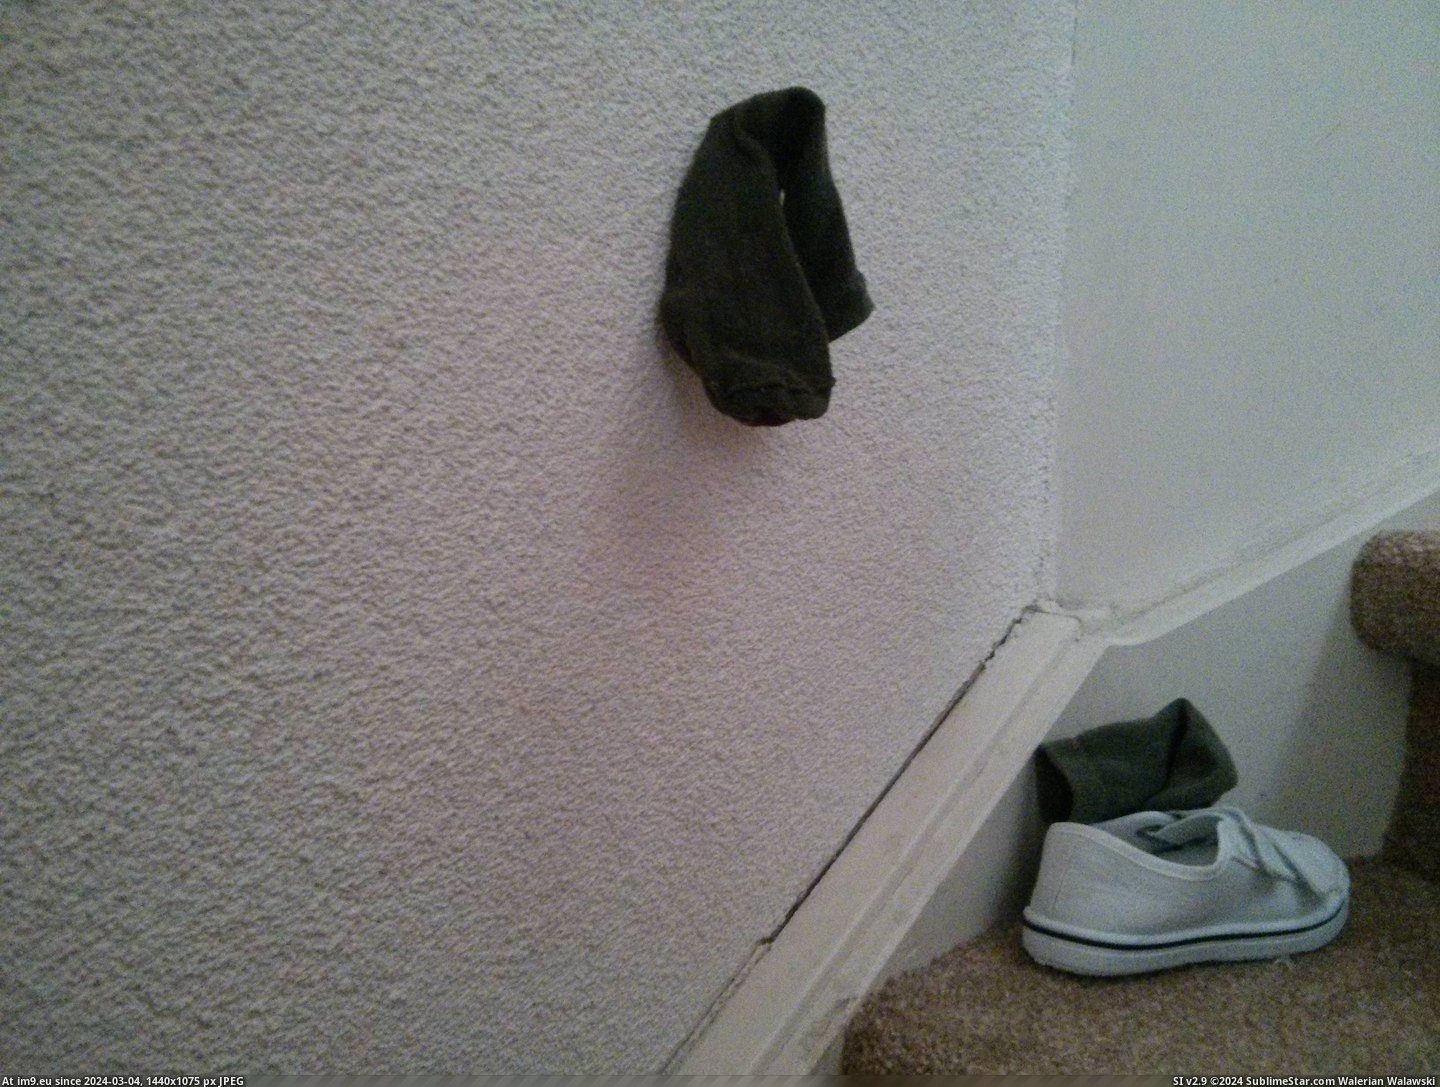 #One #Wall #Stairs #Tossed #Sticked #Son #Socks [Mildlyinteresting] When I tossed my son's socks on the stairs one of them sticked to the wall Pic. (Изображение из альбом My r/MILDLYINTERESTING favs))